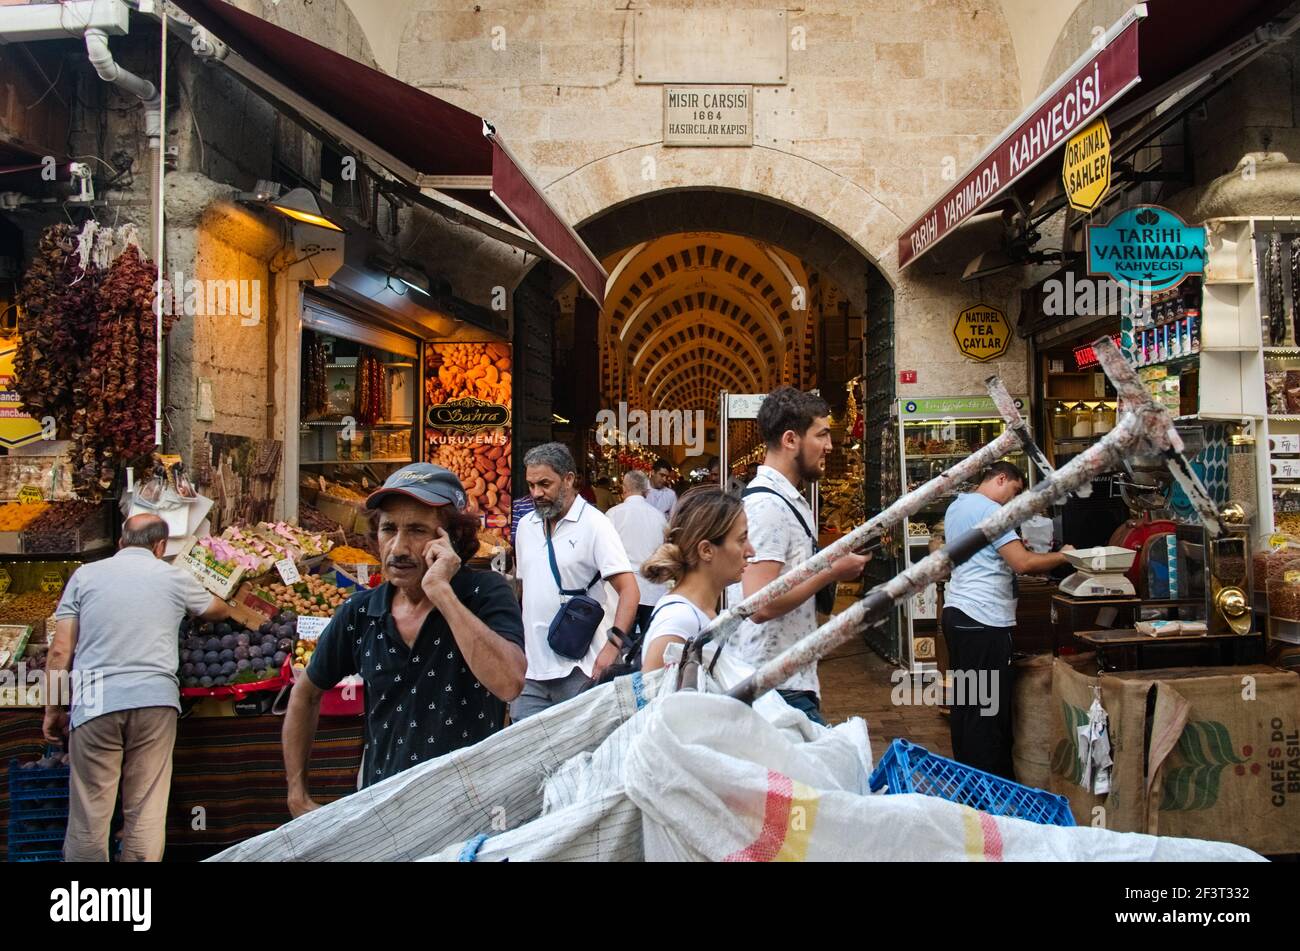 Istanbul, Turkey - September, 2018: Crowd of people near market stalls near entrance to the Grand Bazaar in Istanbul Stock Photo